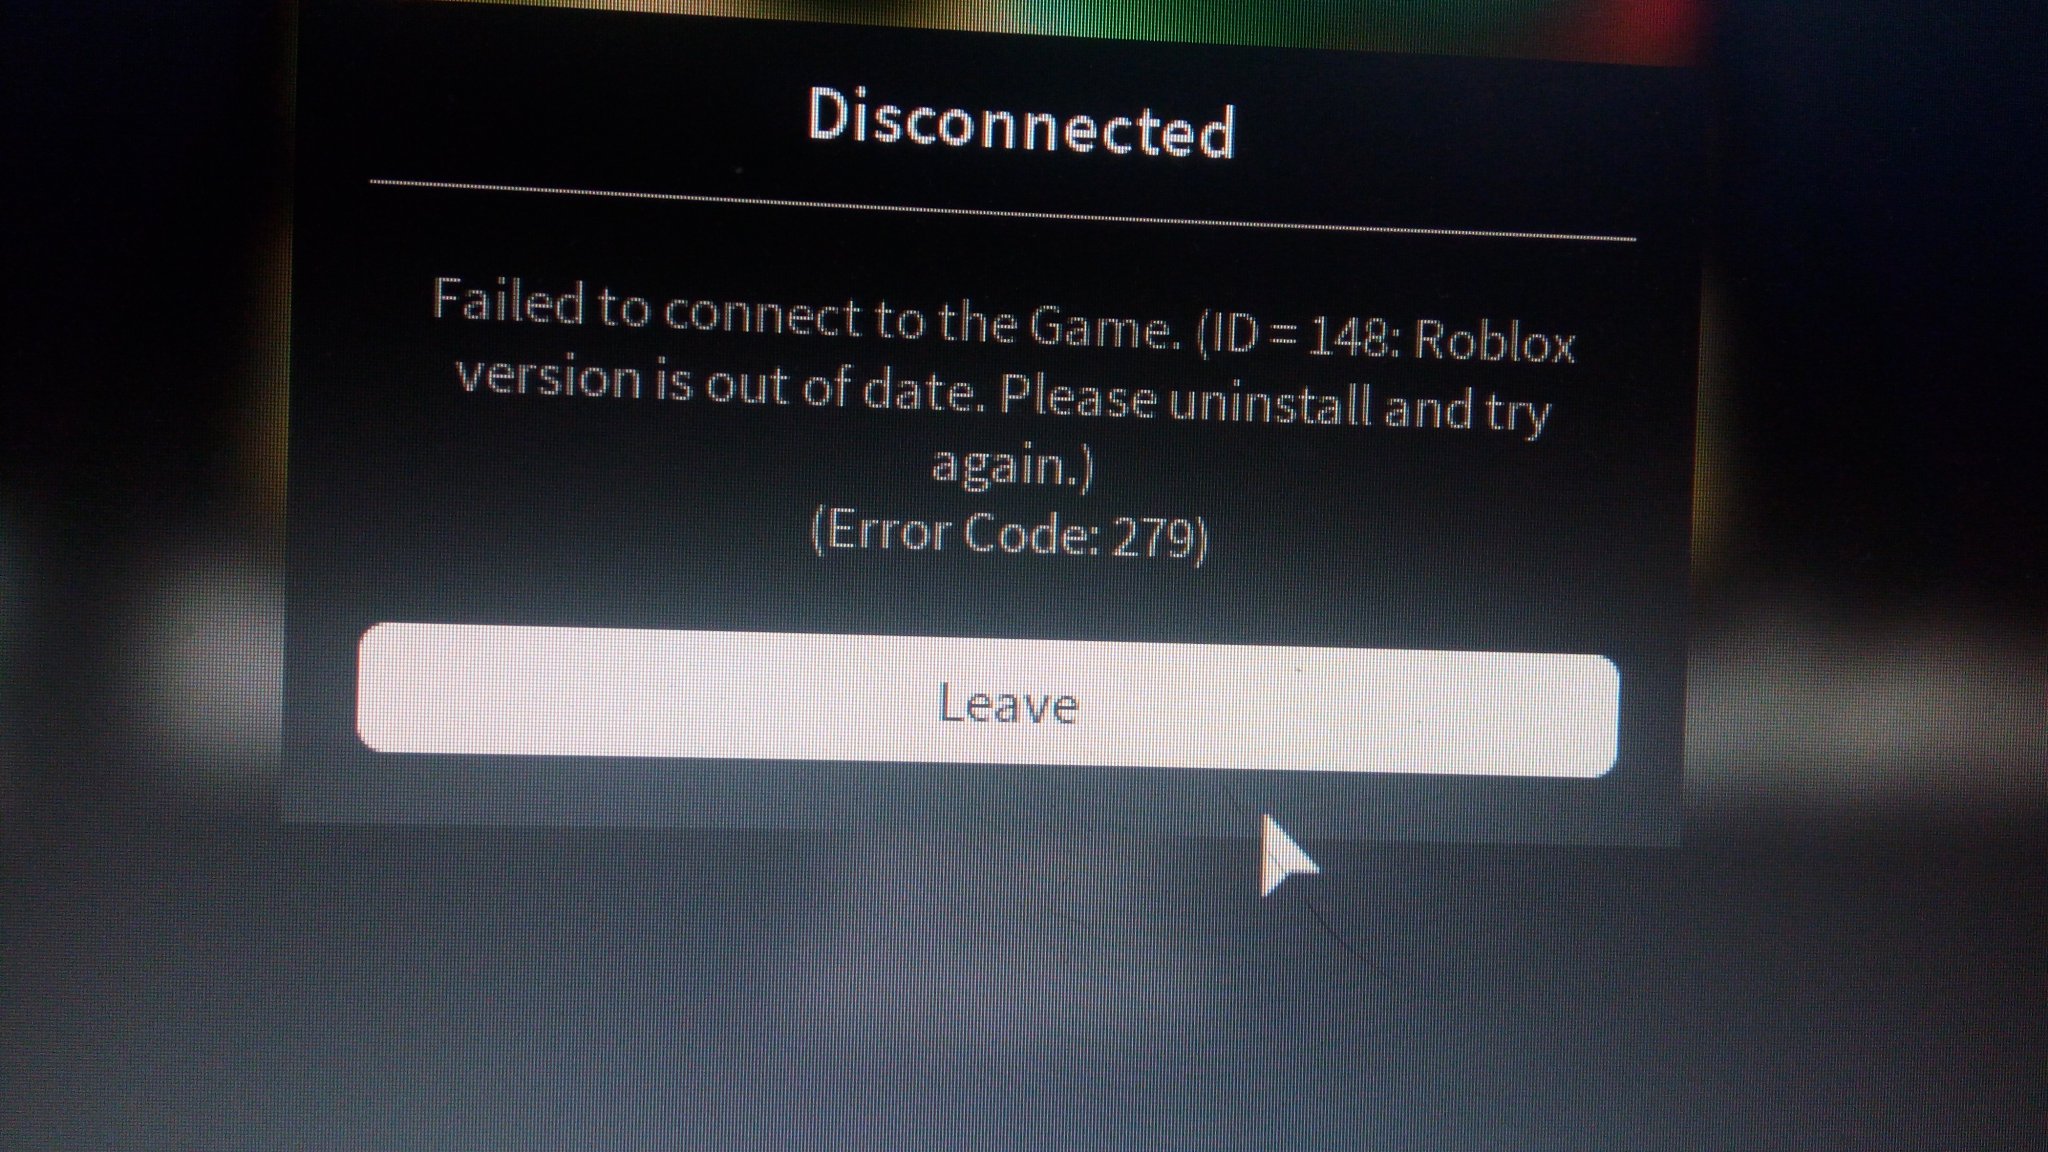 Роблокс ошибка символы. Error code 279. Ошибка 279 в РОБЛОКС. Roblox Error code 279 17. Failed to connect to the game Roblox Error code 279.